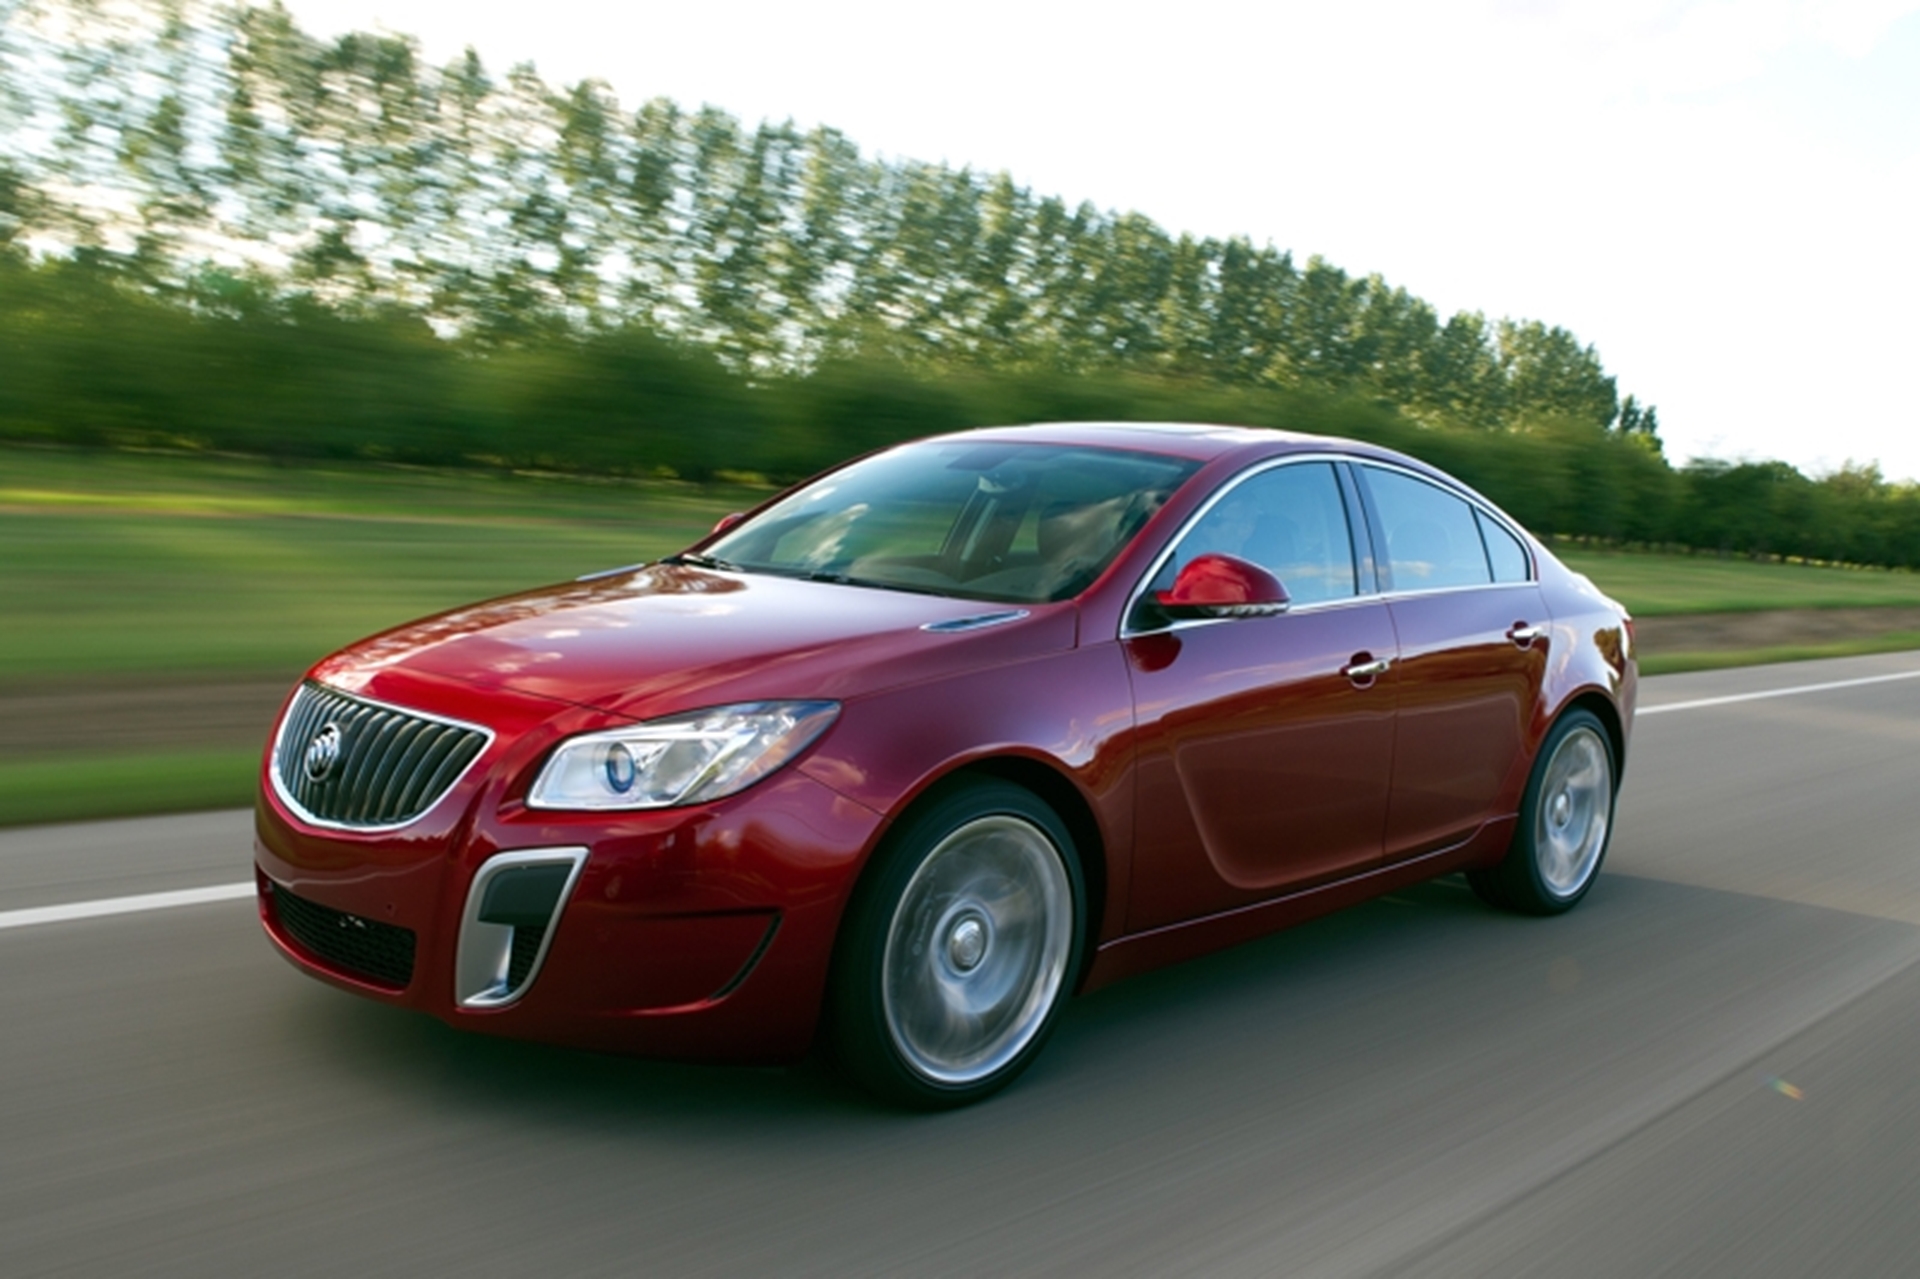 Drivetrain Changes Announced for Buick Regal Lineup